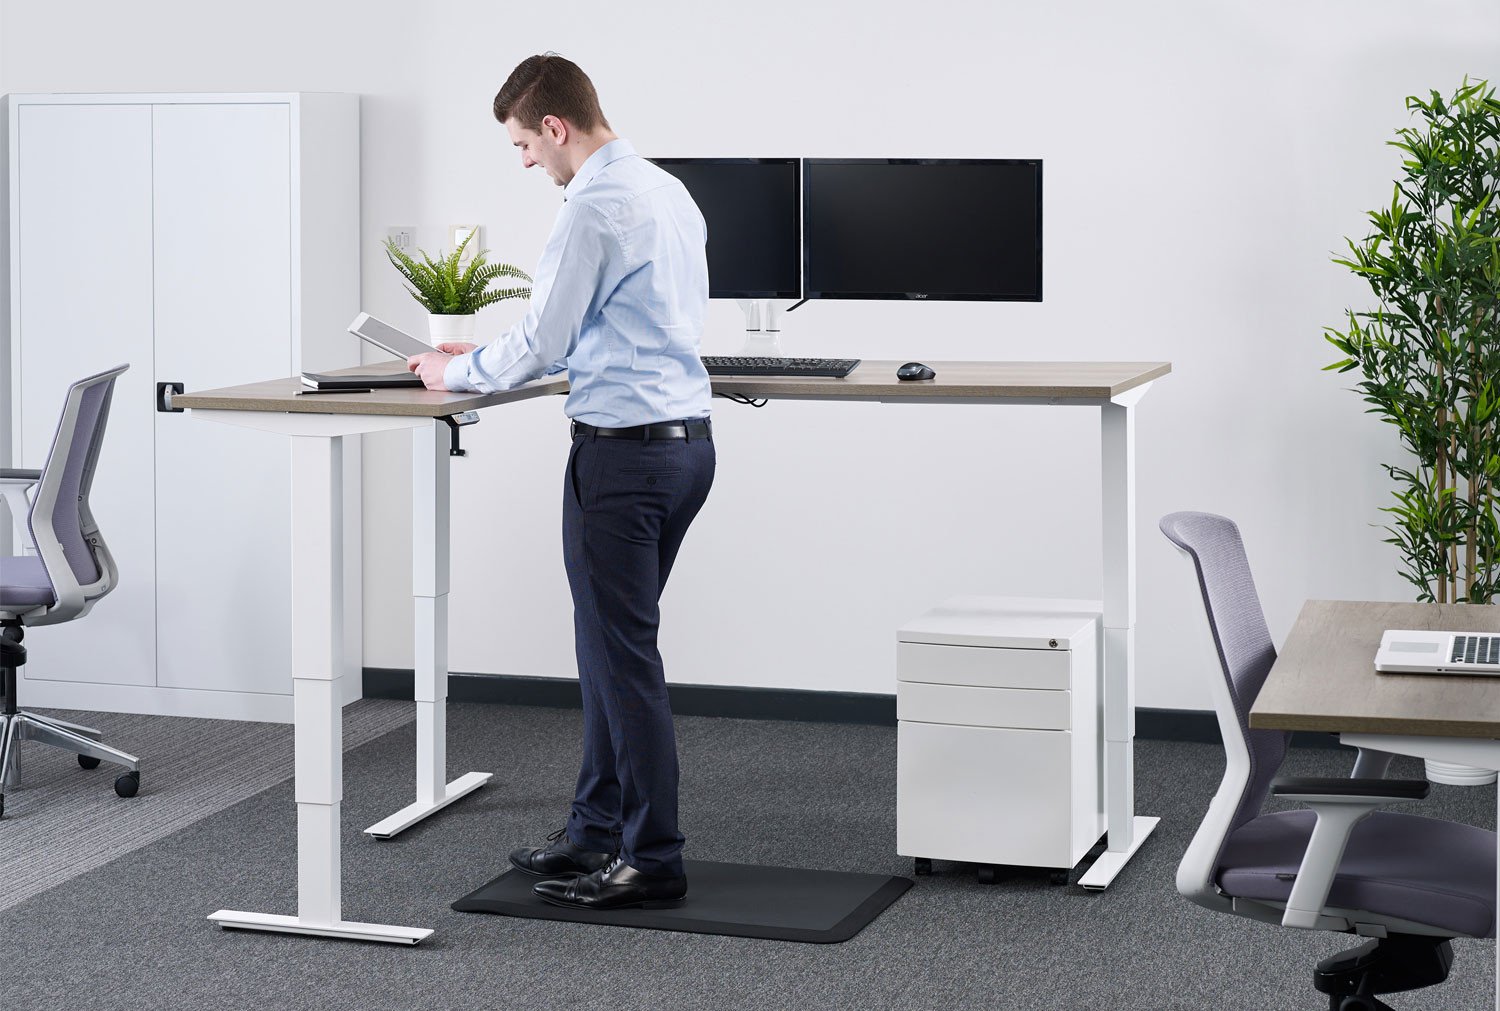 Maximising Work Performance With A Stand up desk: Achieve More By Sitting Less